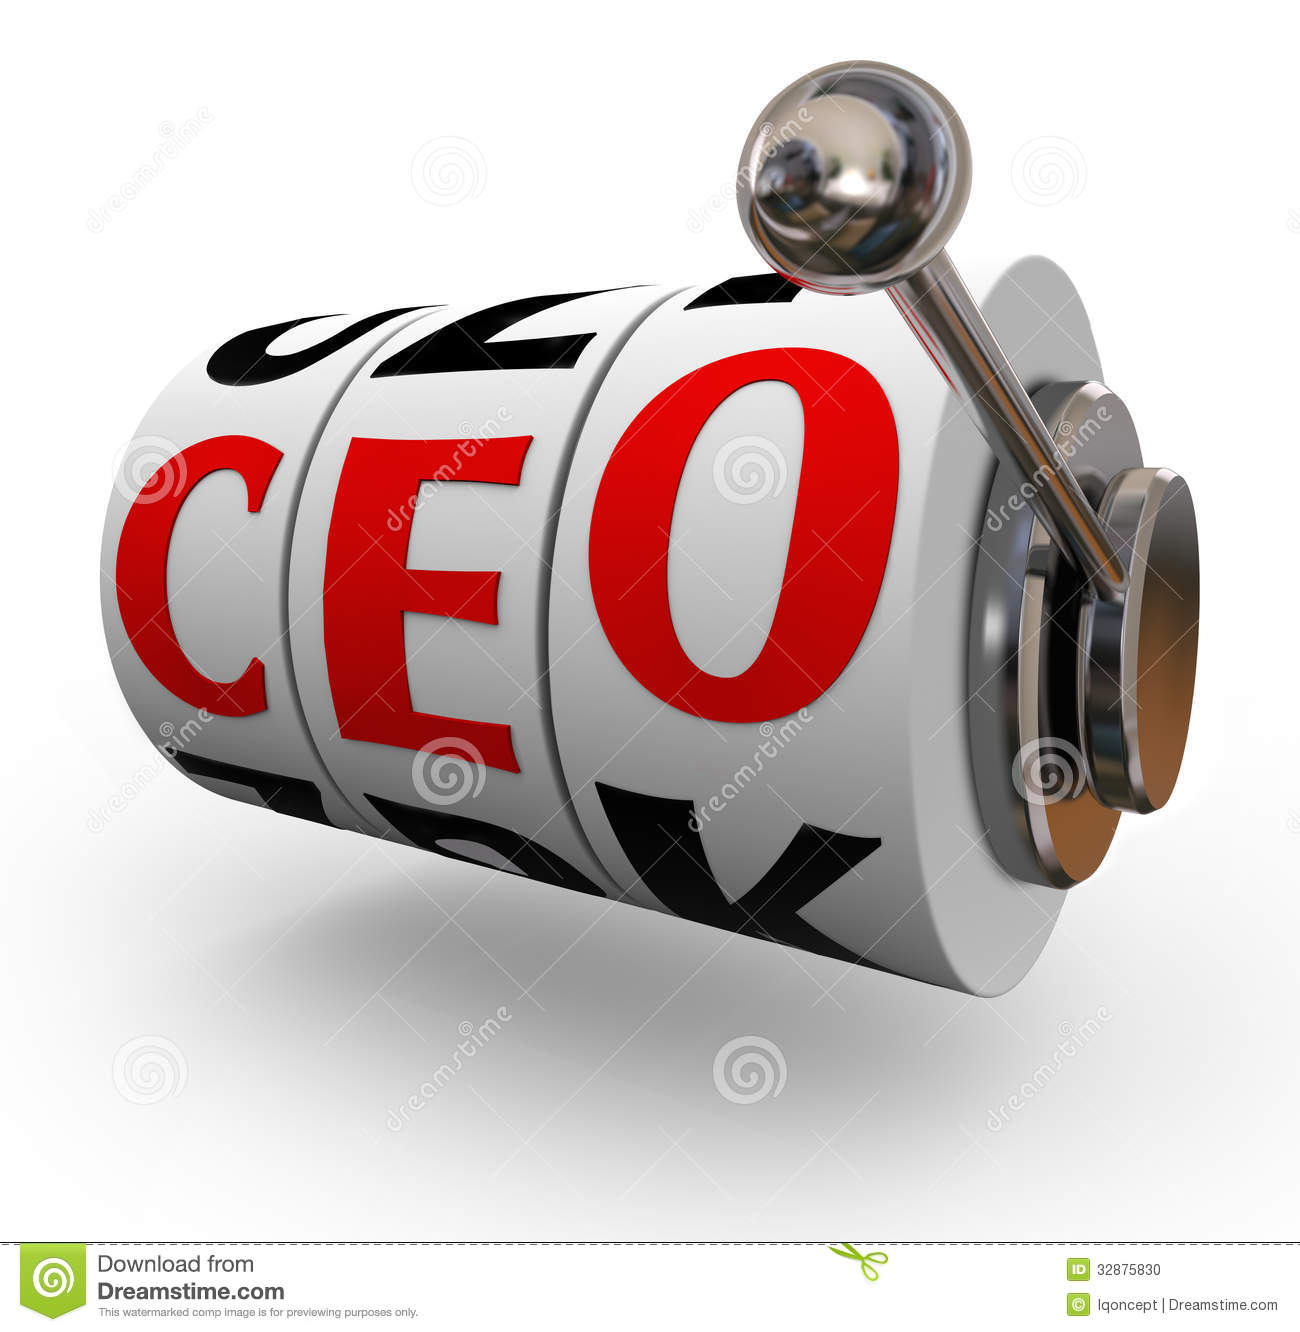 Searching For A Good Quality Chief Executive Officer Or Ceo Can Be